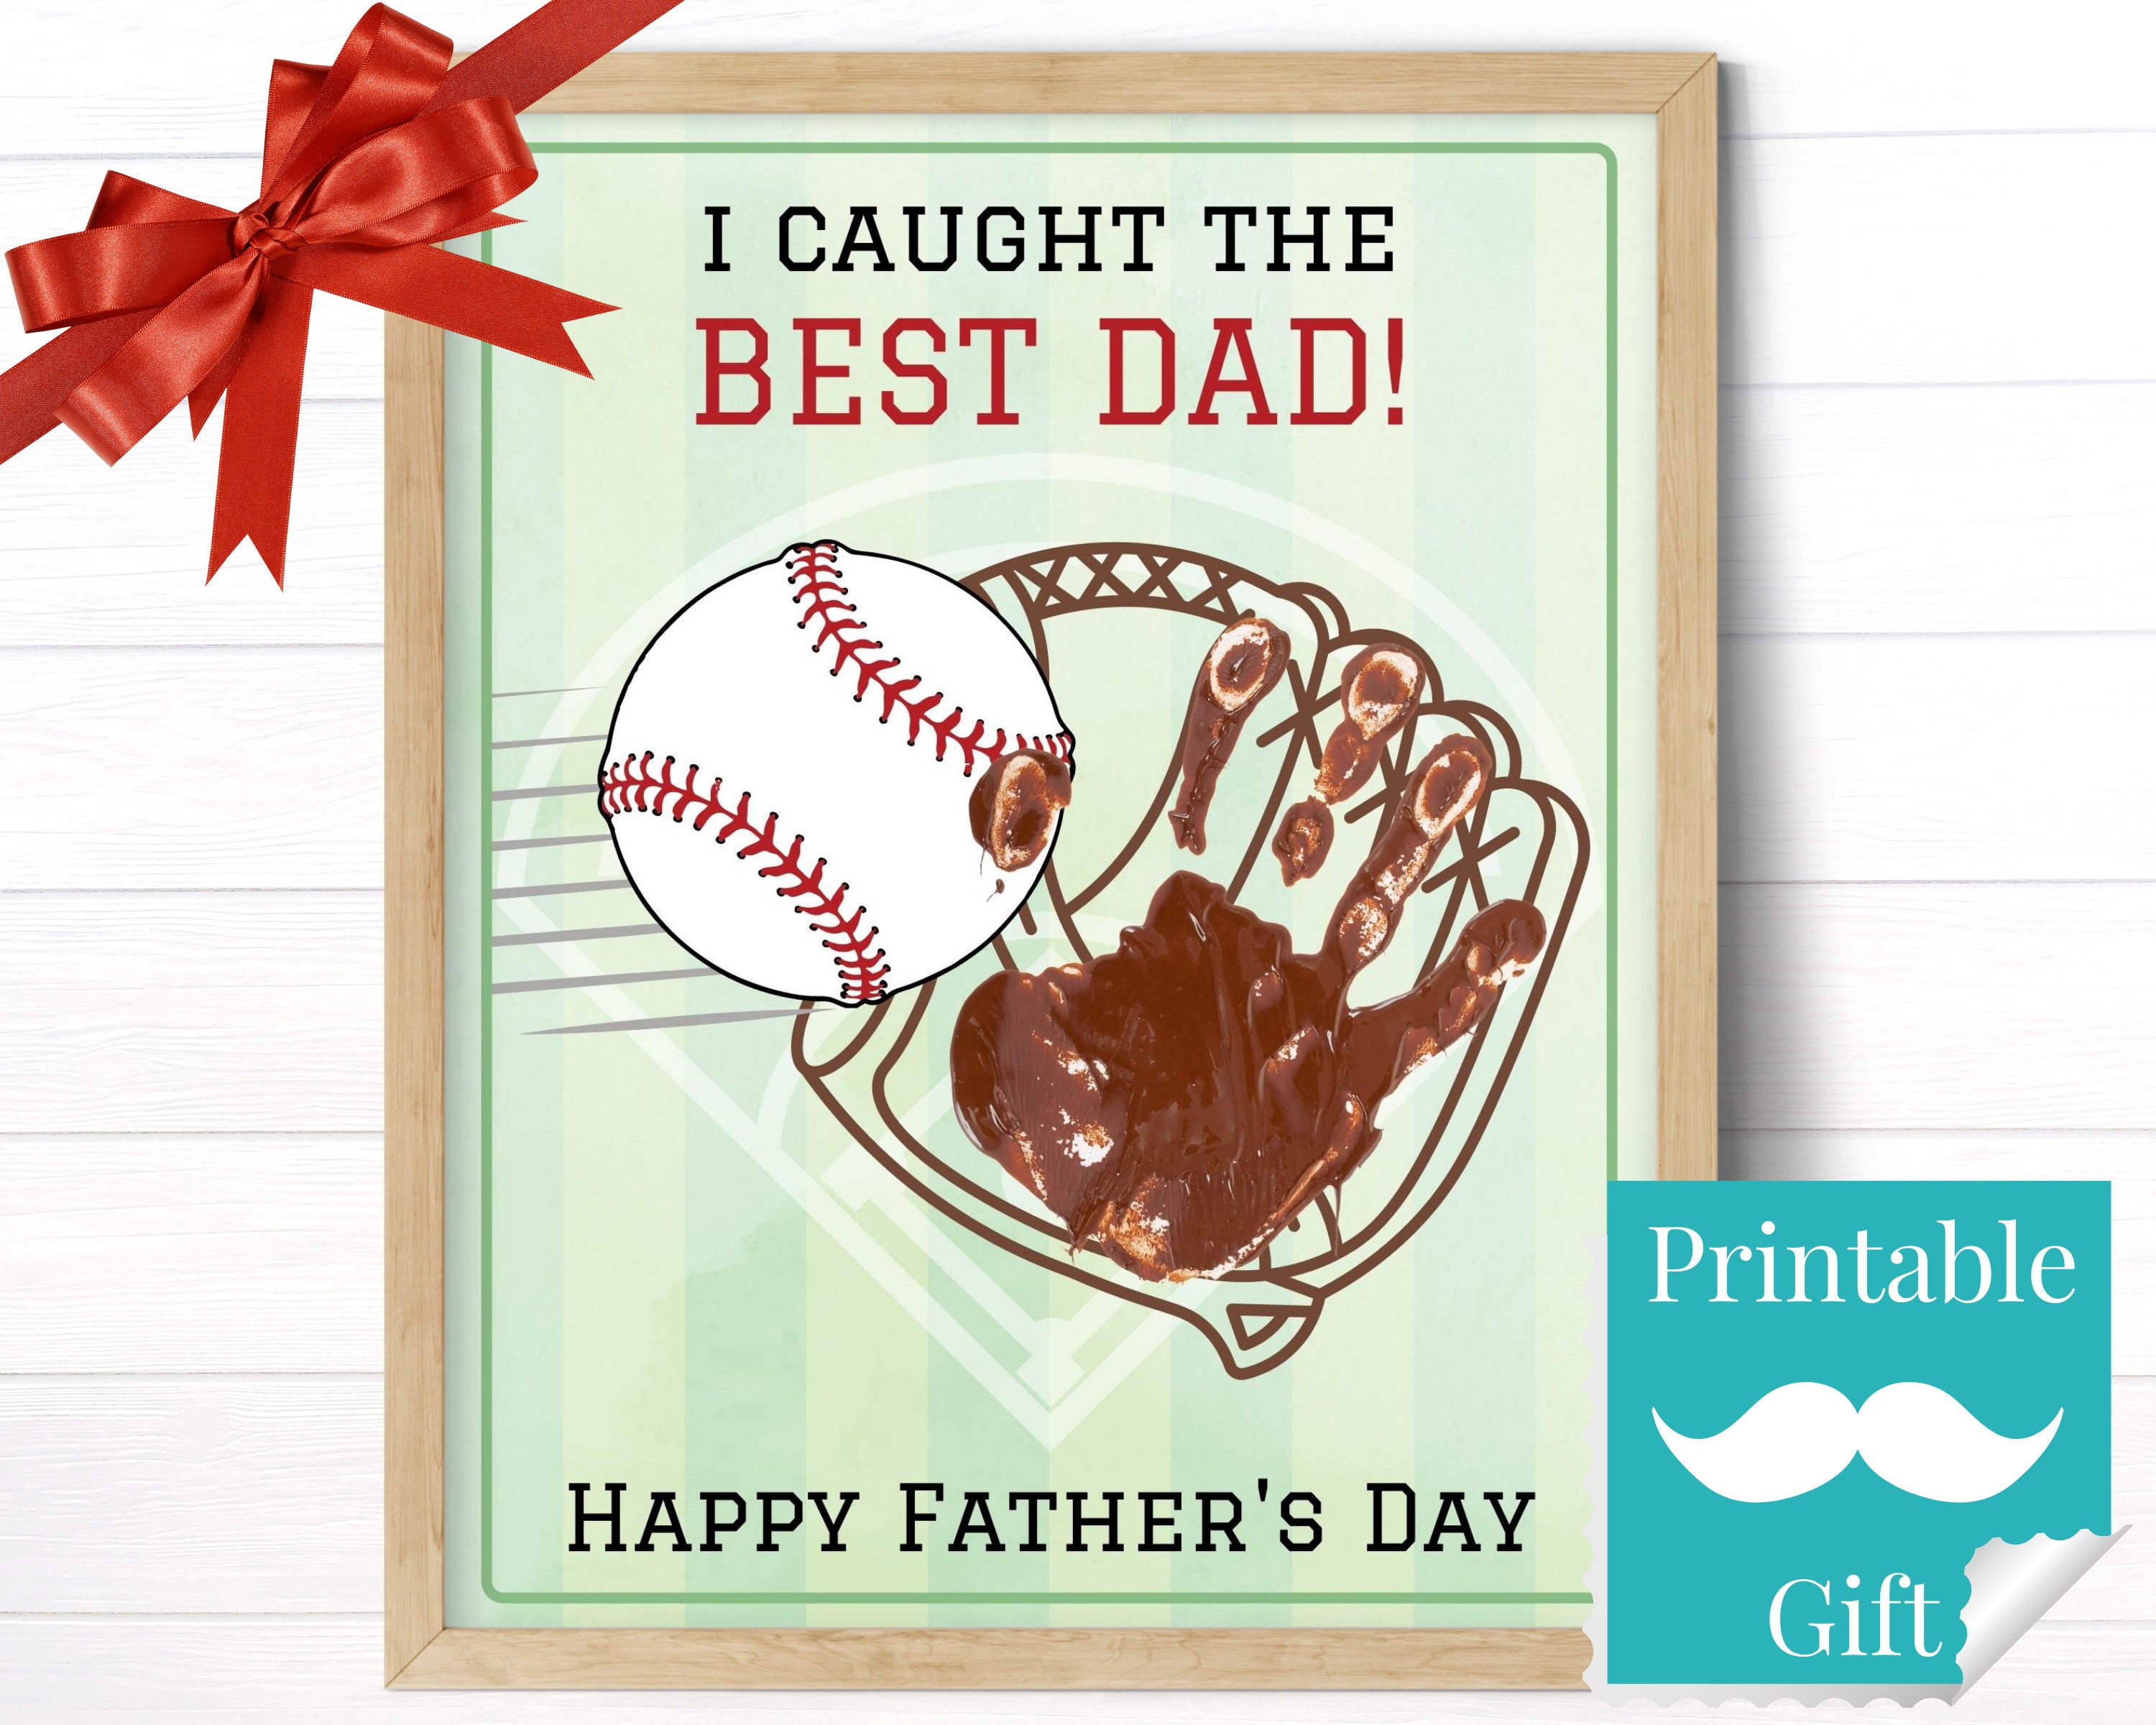 Father's Day Gift Ideas - Best Fathers Day Gifts - Personalized Baseball Caps 